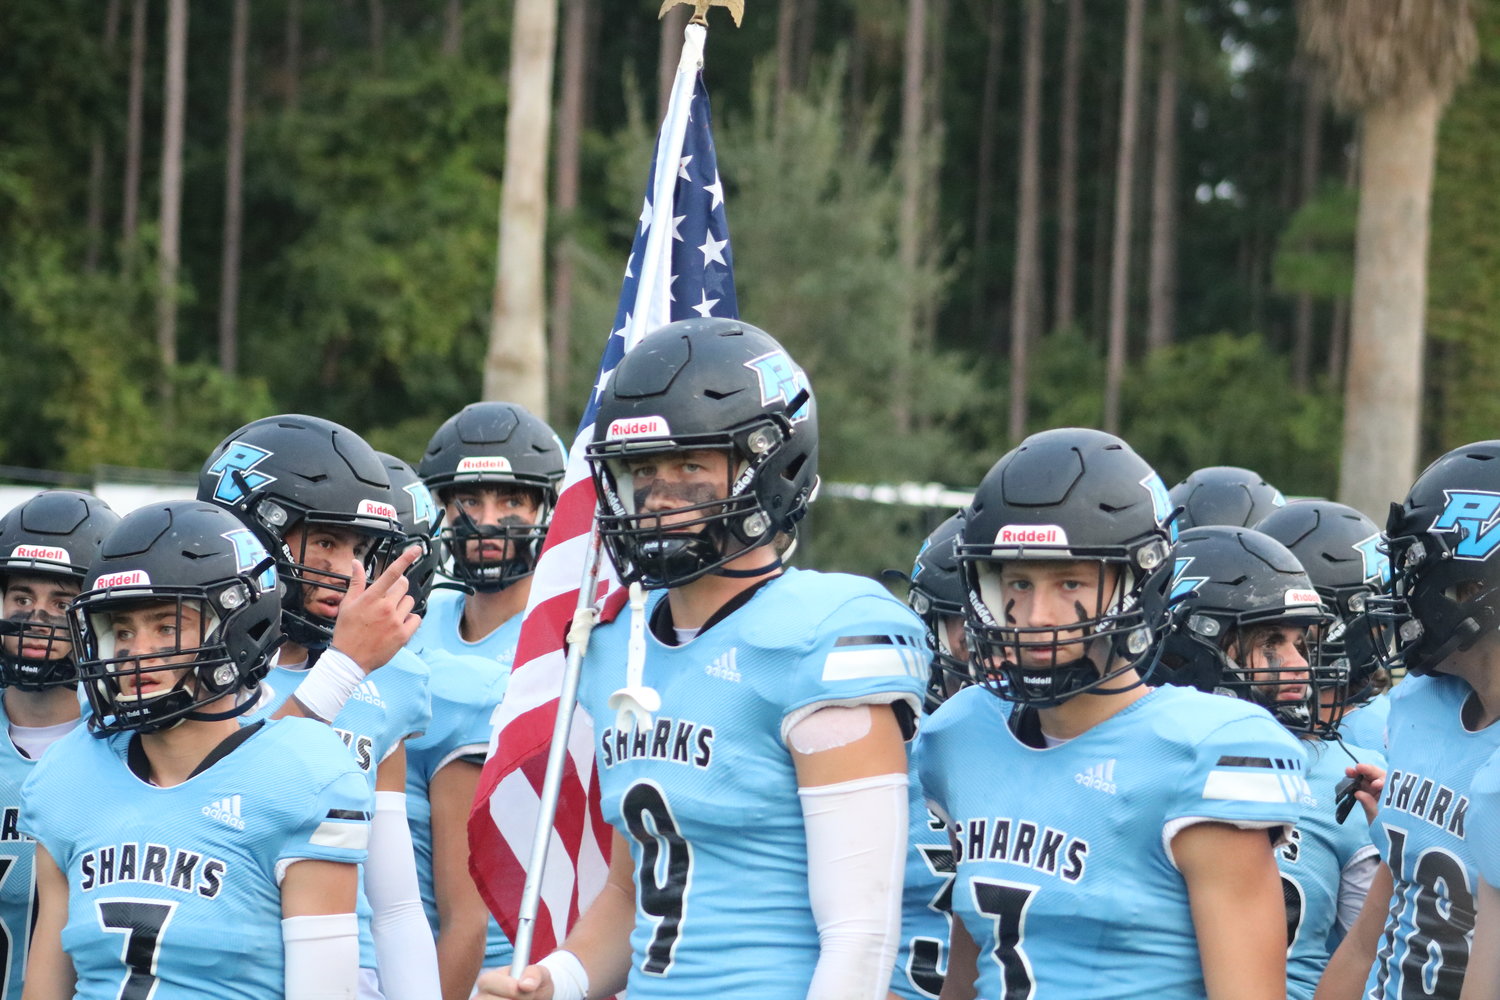 The Ponte Vedra Sharks football team will look to get their first district win this season when they travel to take on First Coast.